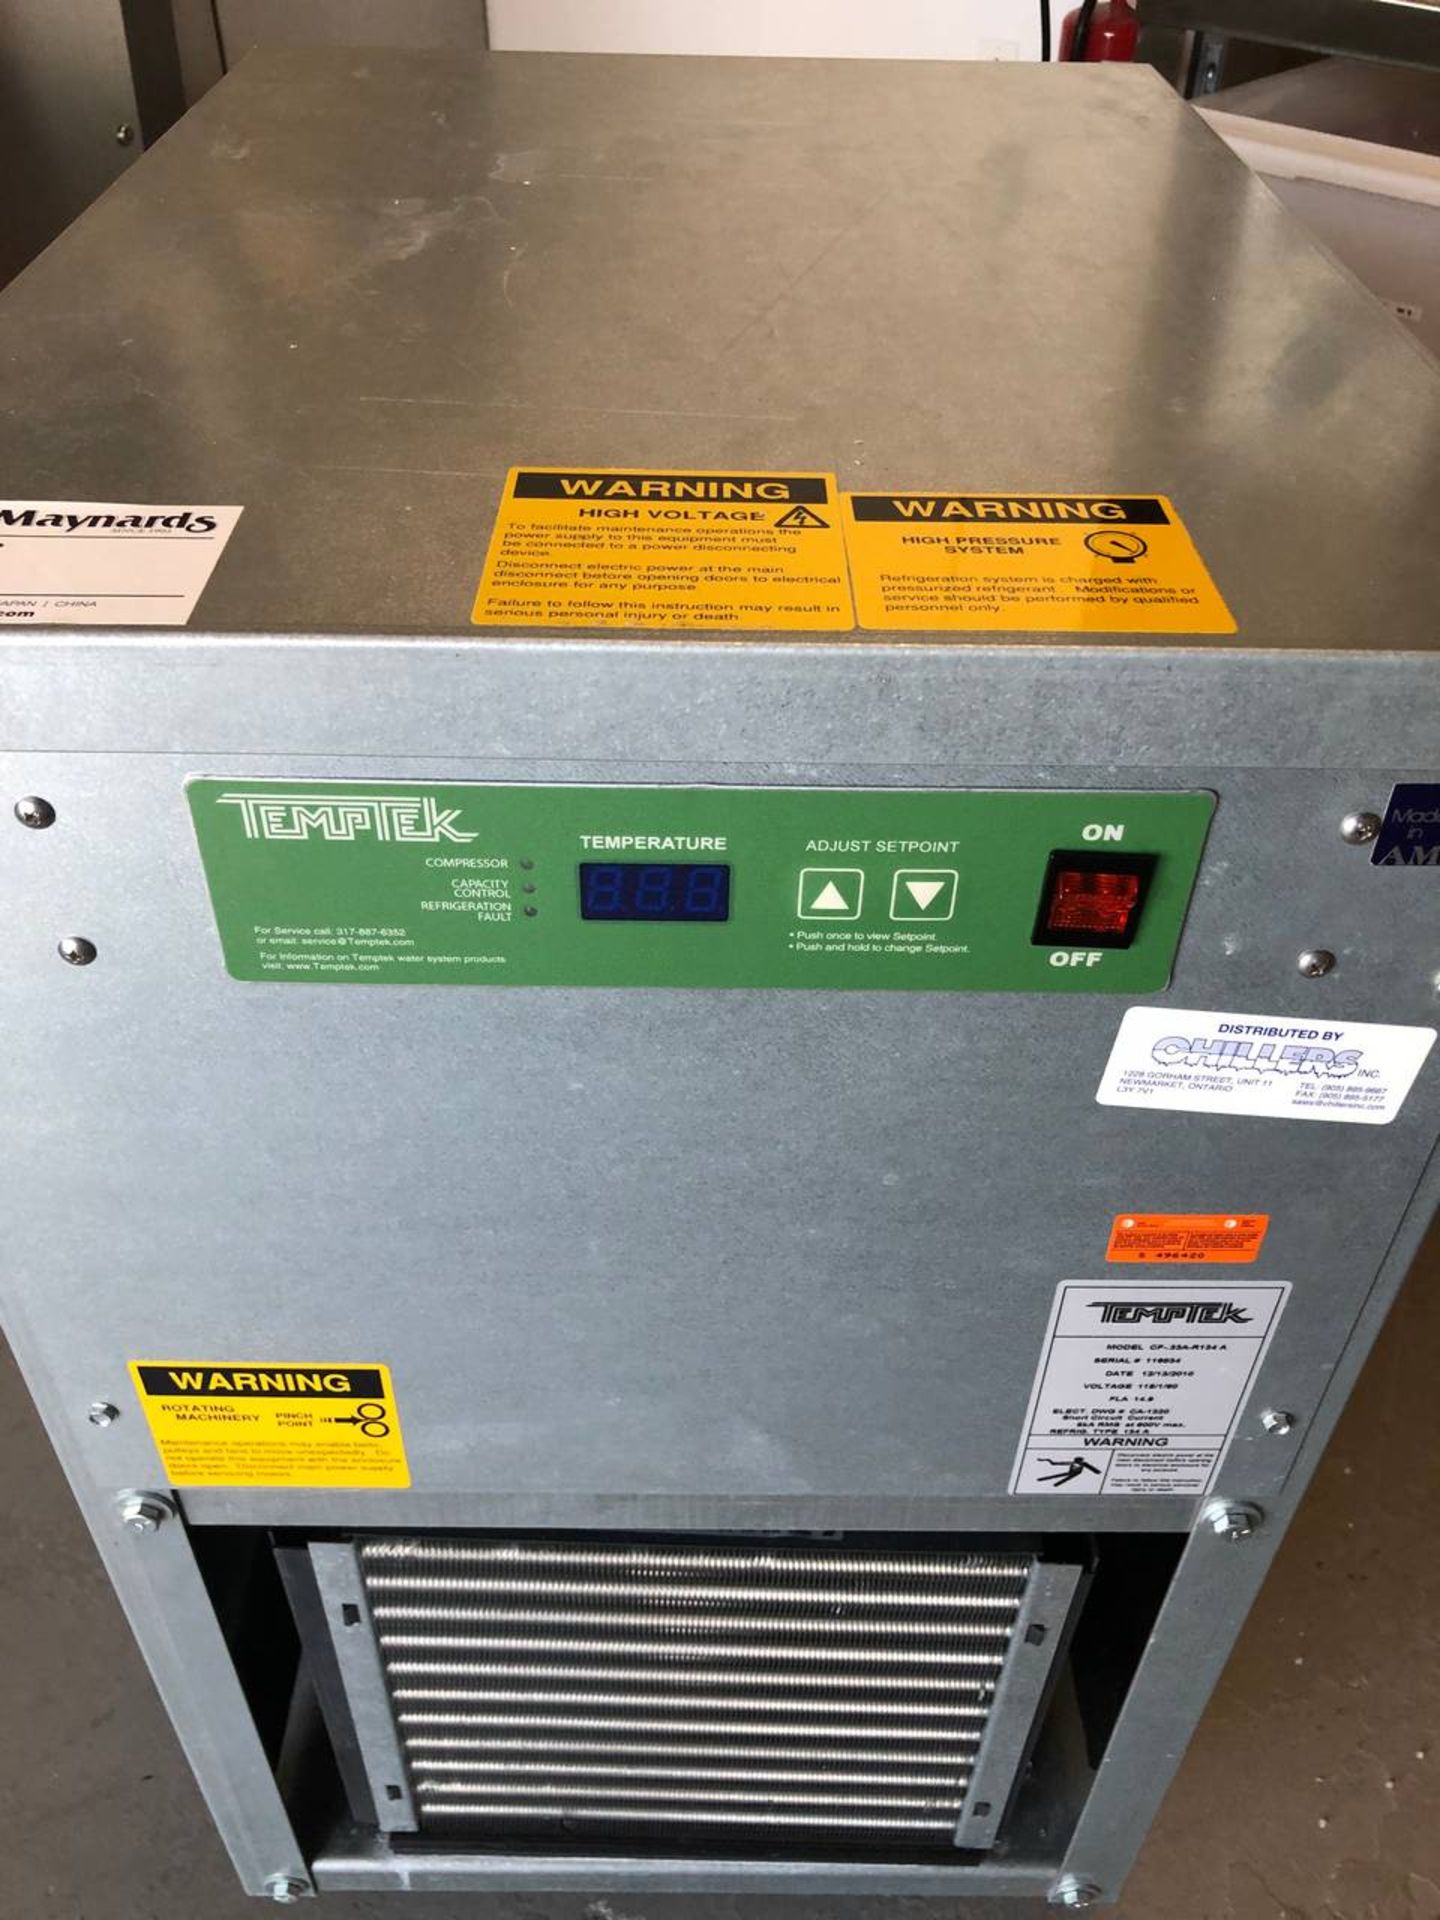 Temptek CF-.33A-R134 A Small Air-Cooled Portable Water Chiller - Image 2 of 4